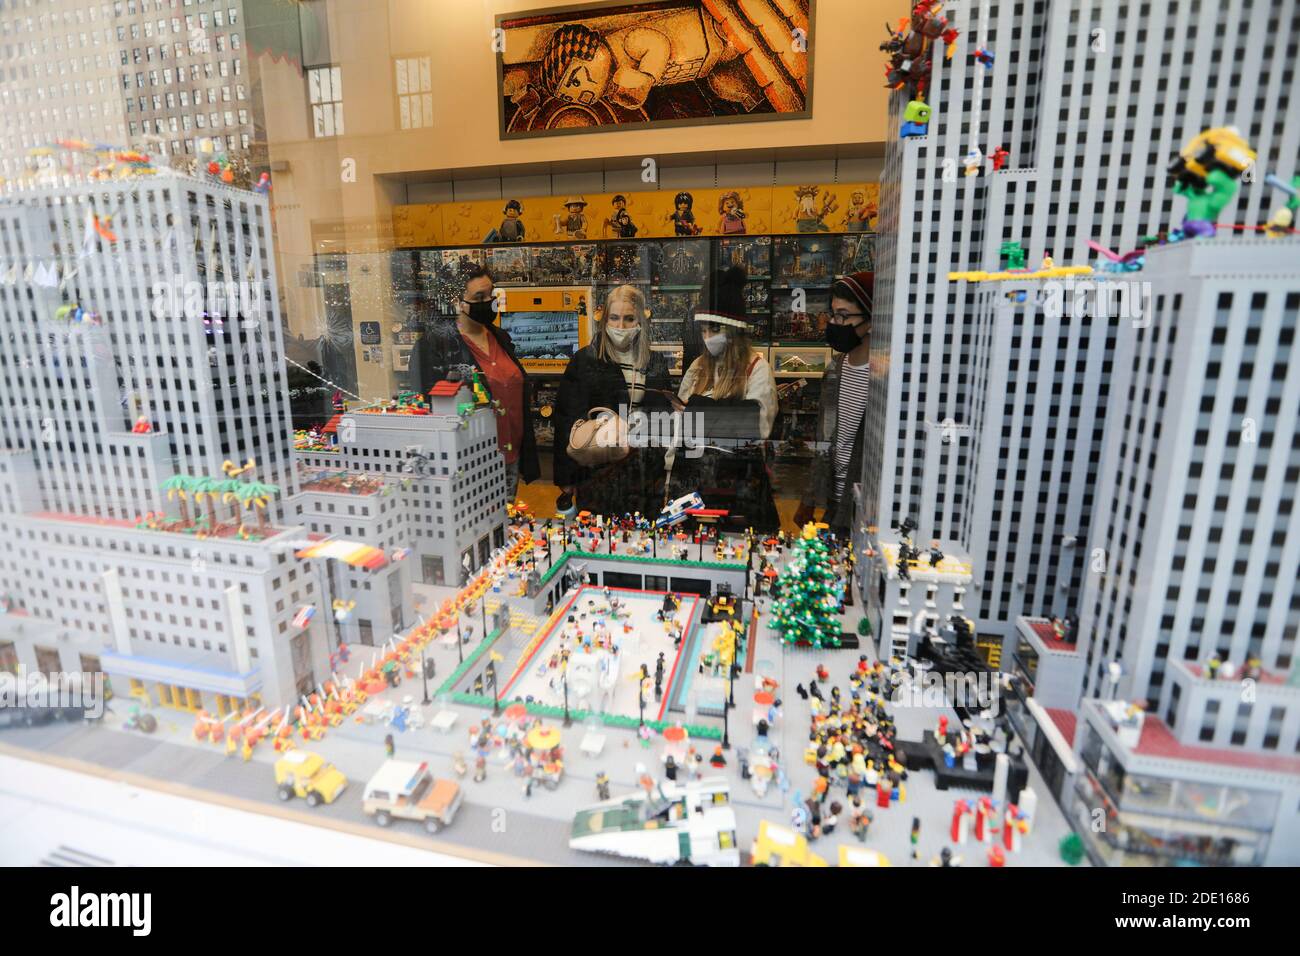 Lego Store New York High Resolution Stock Photography and Images - Alamy